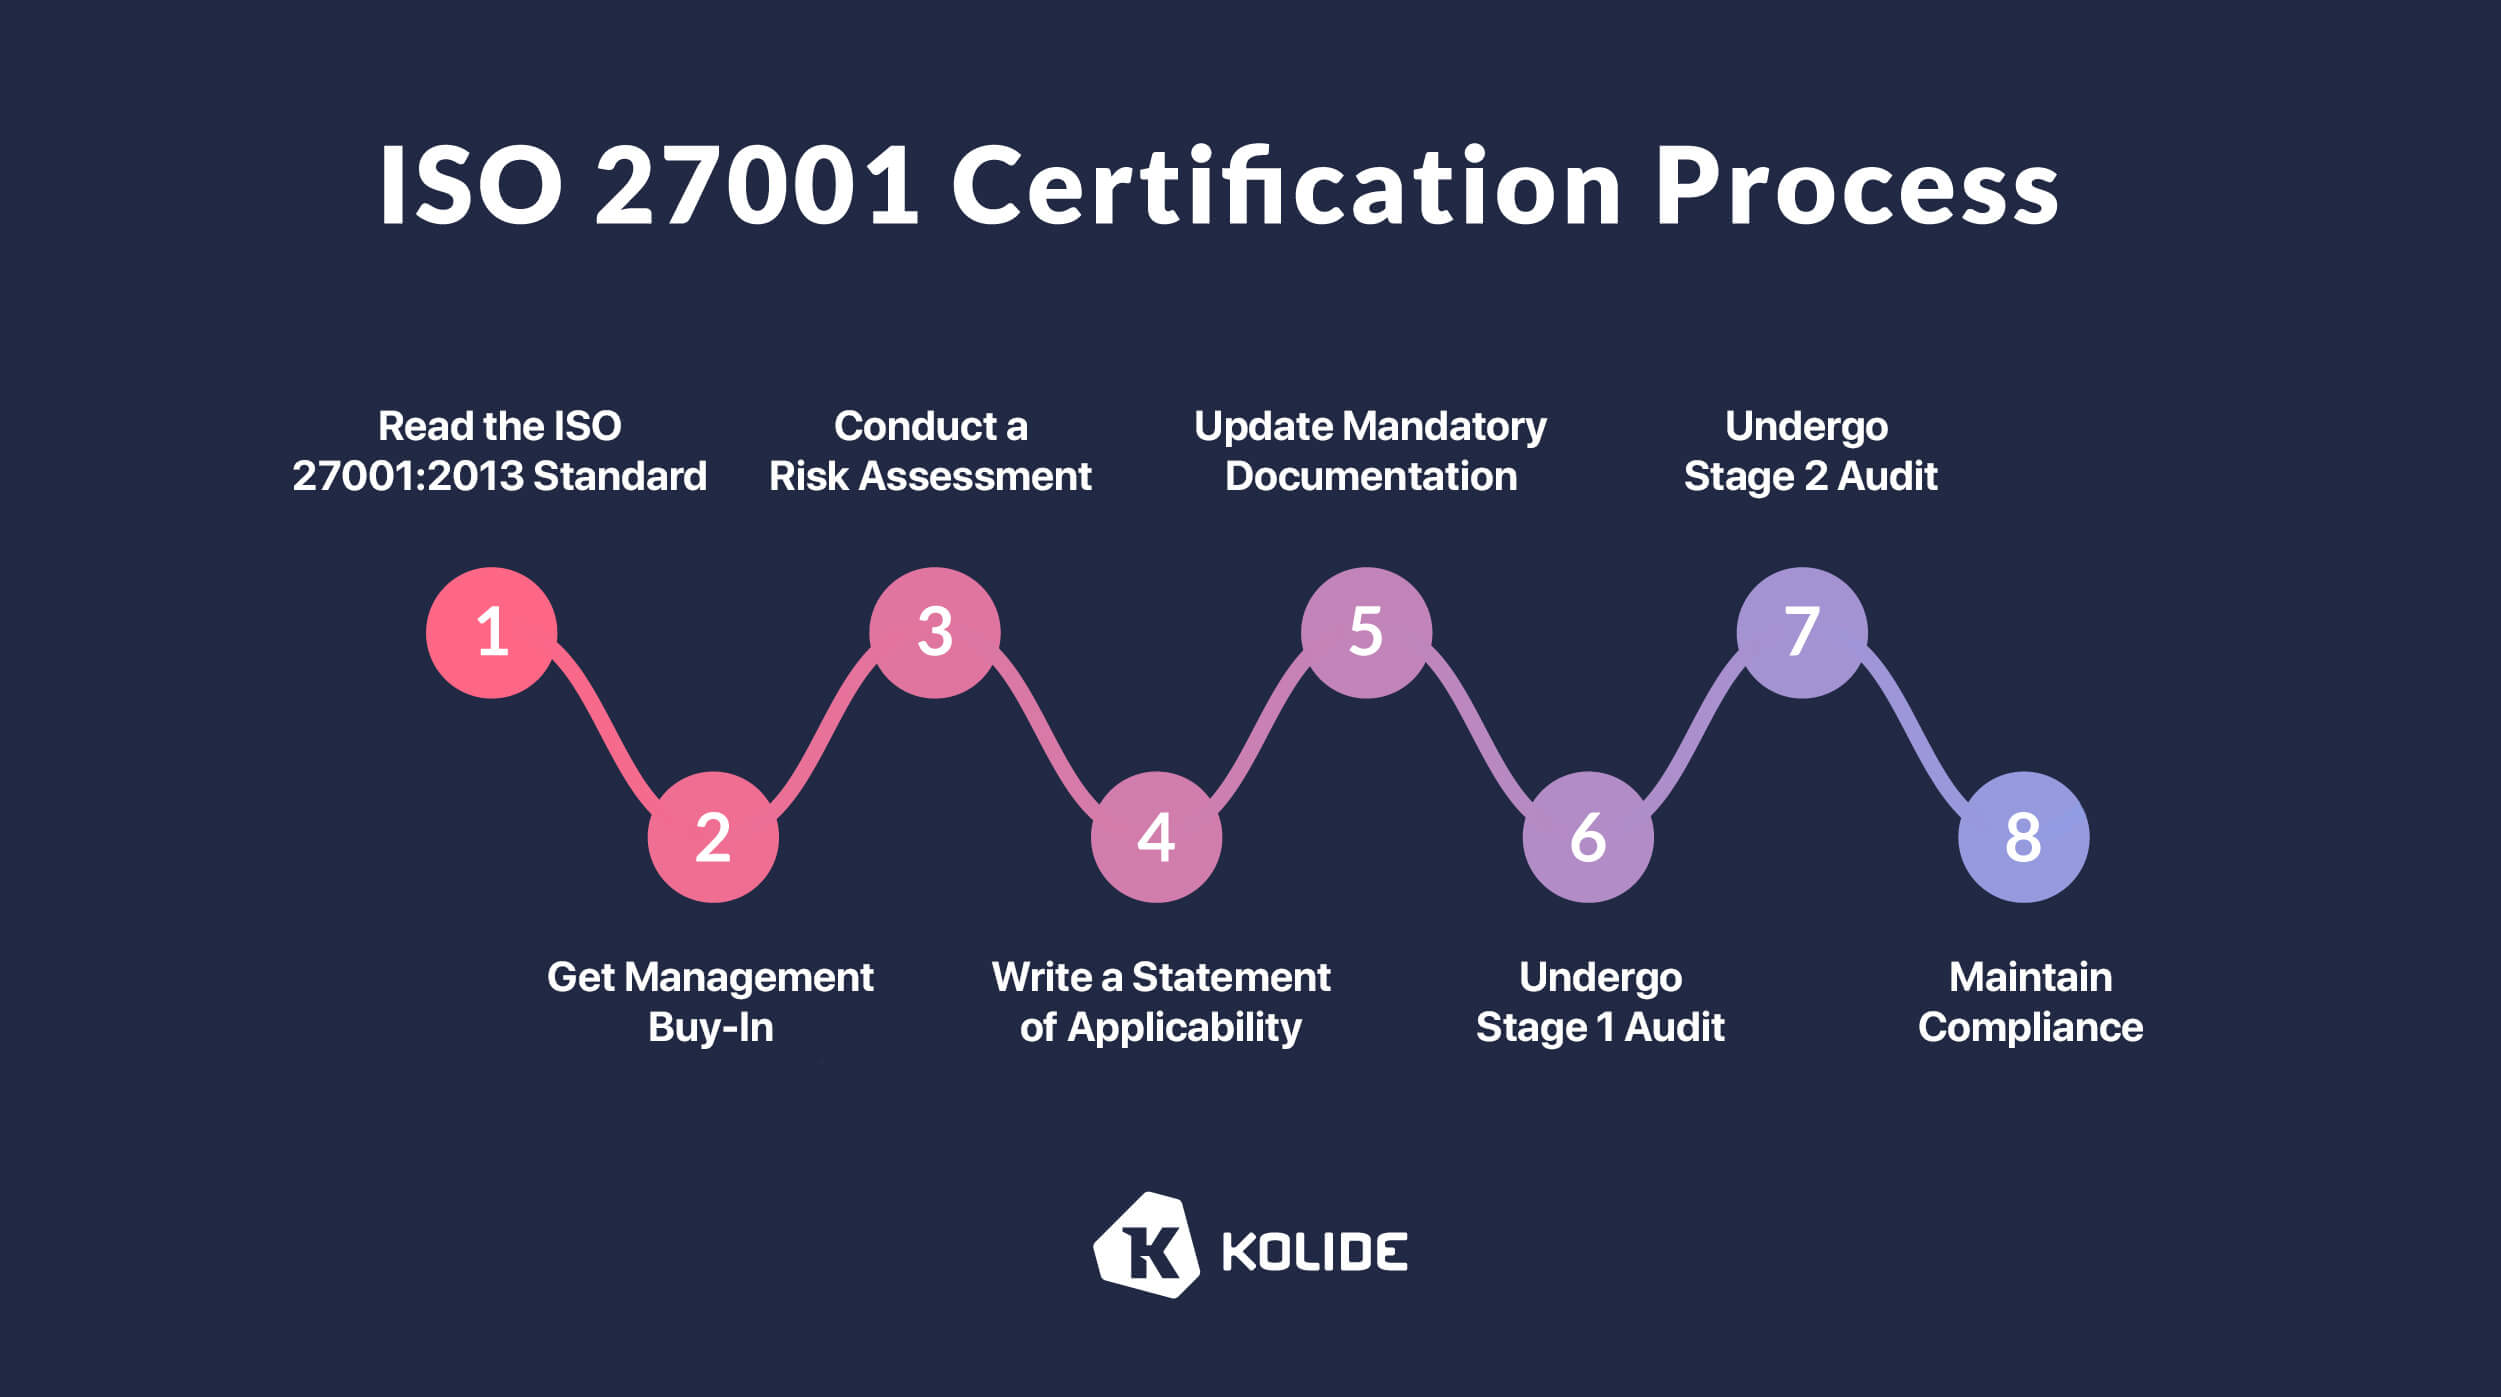 The Business Guide to ISO 27001 Compliance and Certification